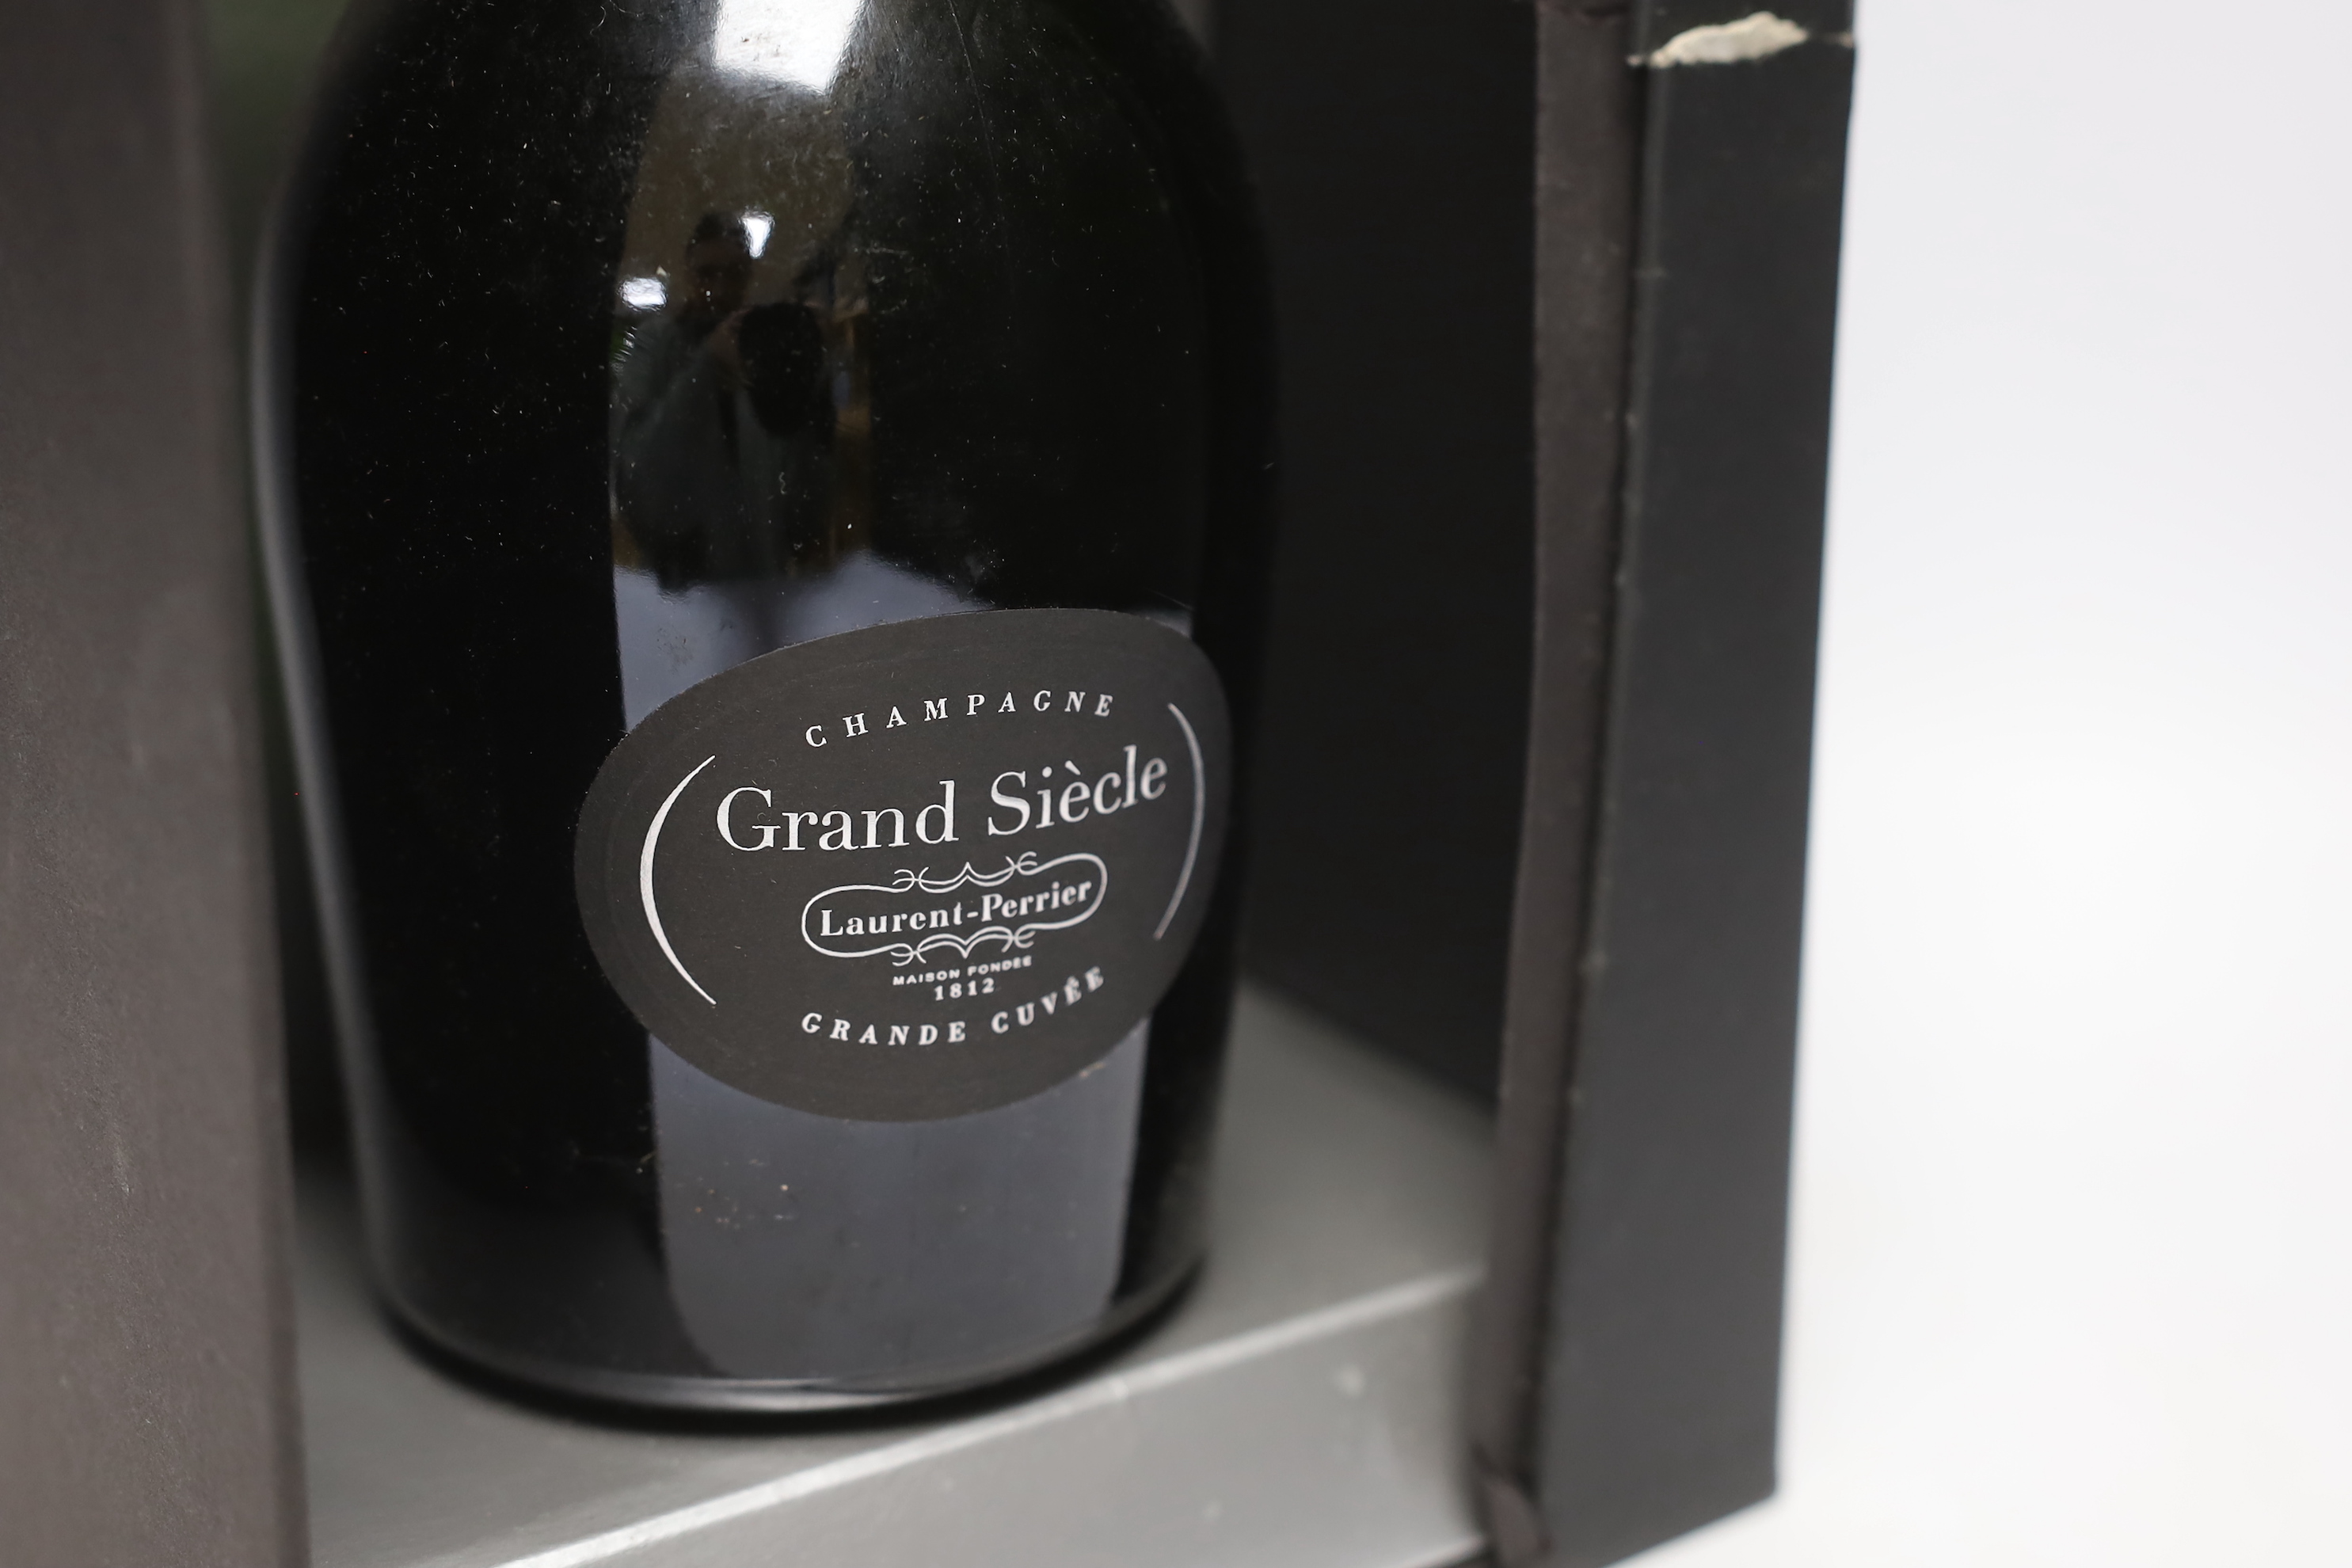 One bottle of Grand Siecle champagne with box